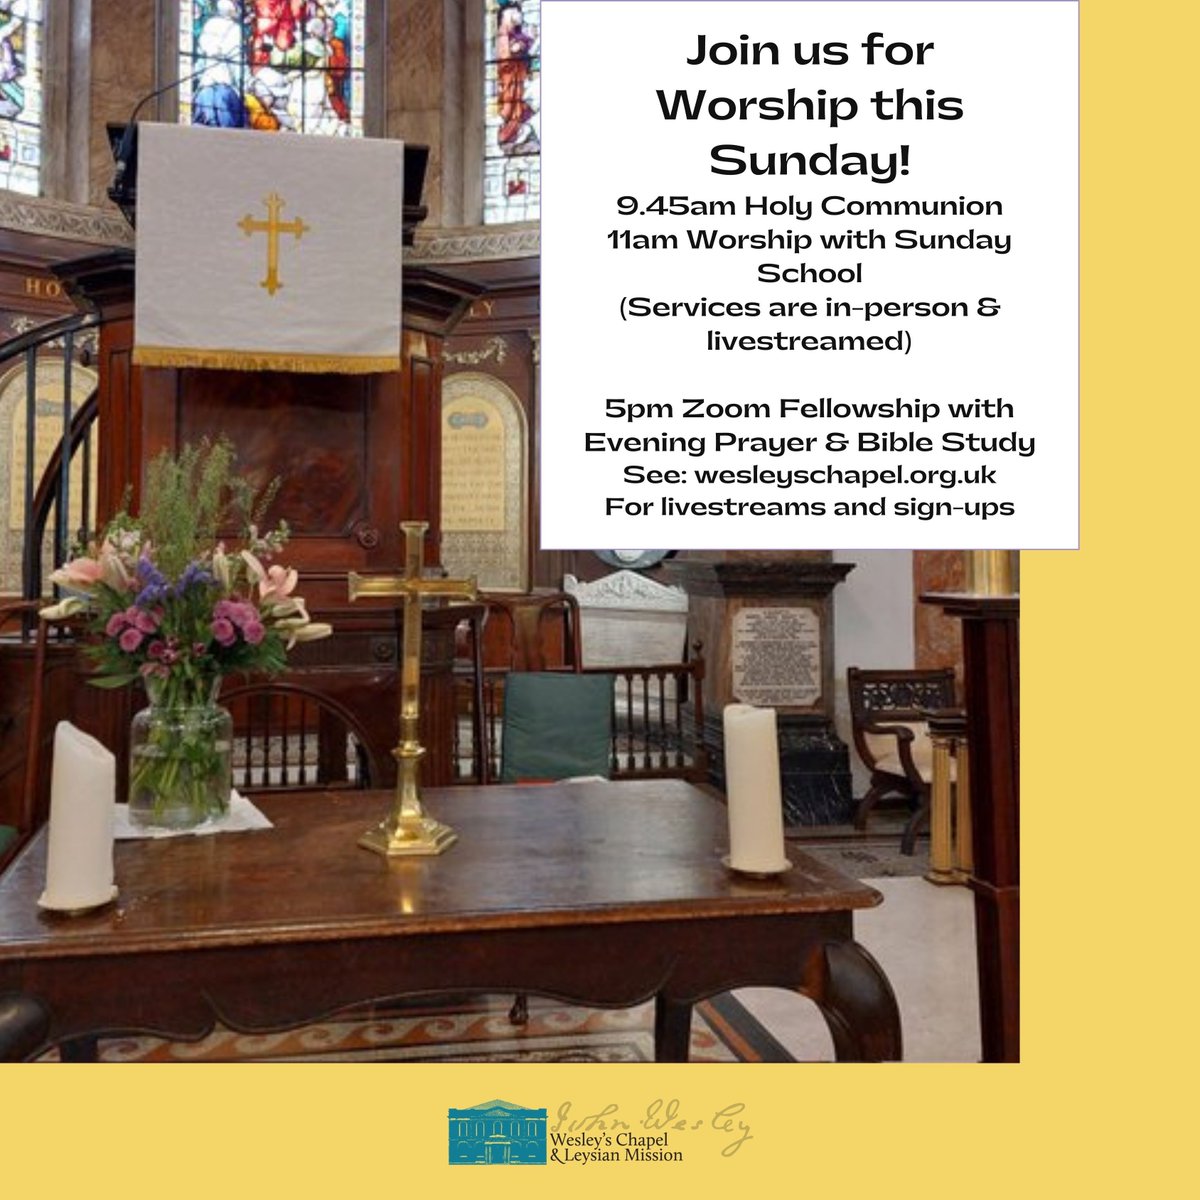 Working out your weekend plans? Why not pencil in some time with us and God? Sunday we have: Holy Communion at 9.45am Worship with Sunday School at 11am Zoom Fellowship with bible study and evening prayer from 5pm. Join us, in person or virtually buff.ly/3PpiEz5